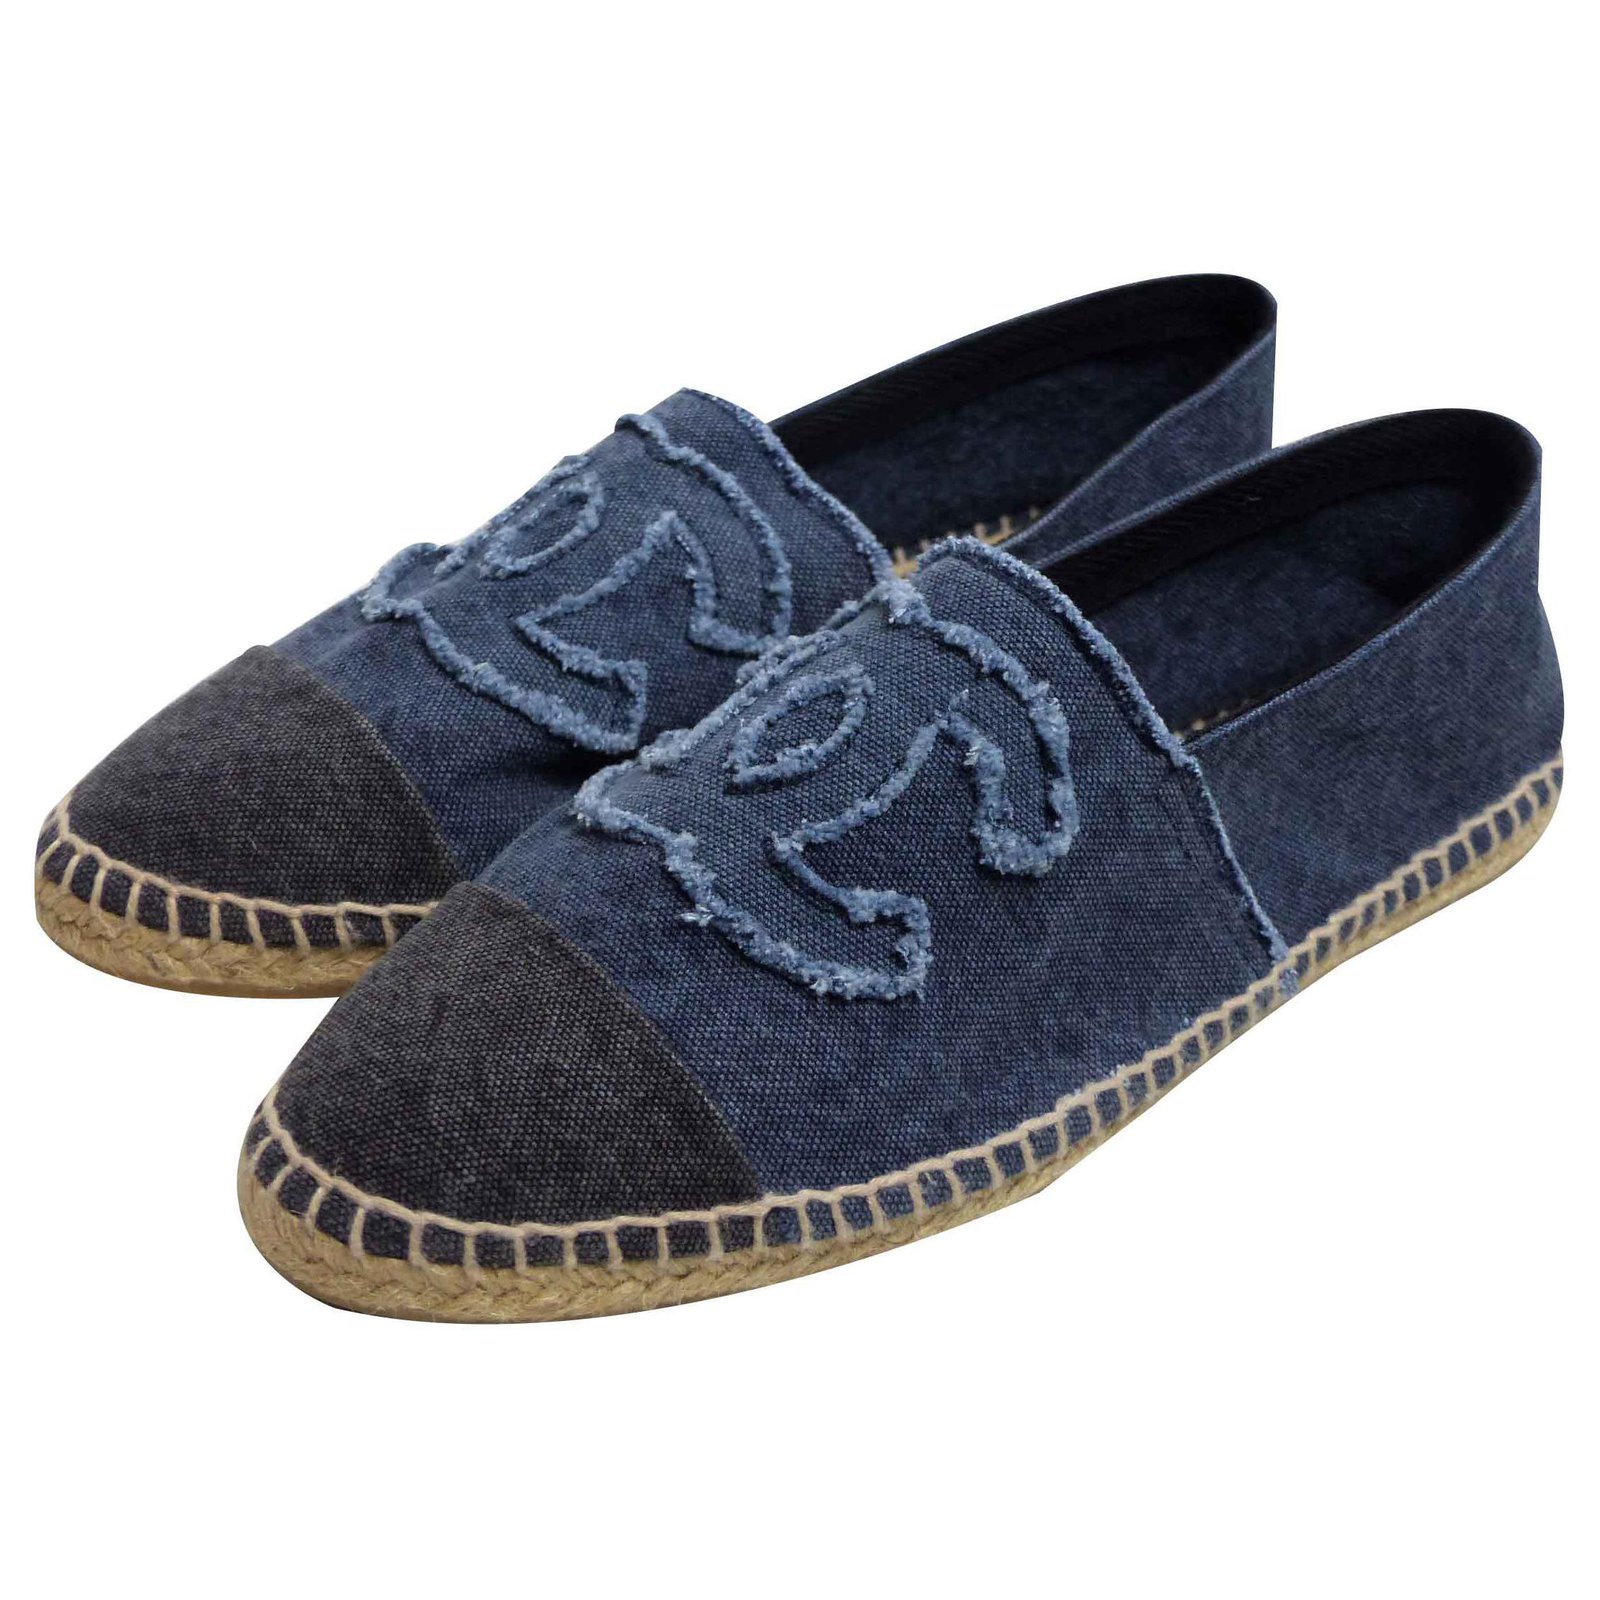 CHANEL Espadrilles COCO Denim Slip-on Flat Shoes Women EU 37 Red CC From  Japan